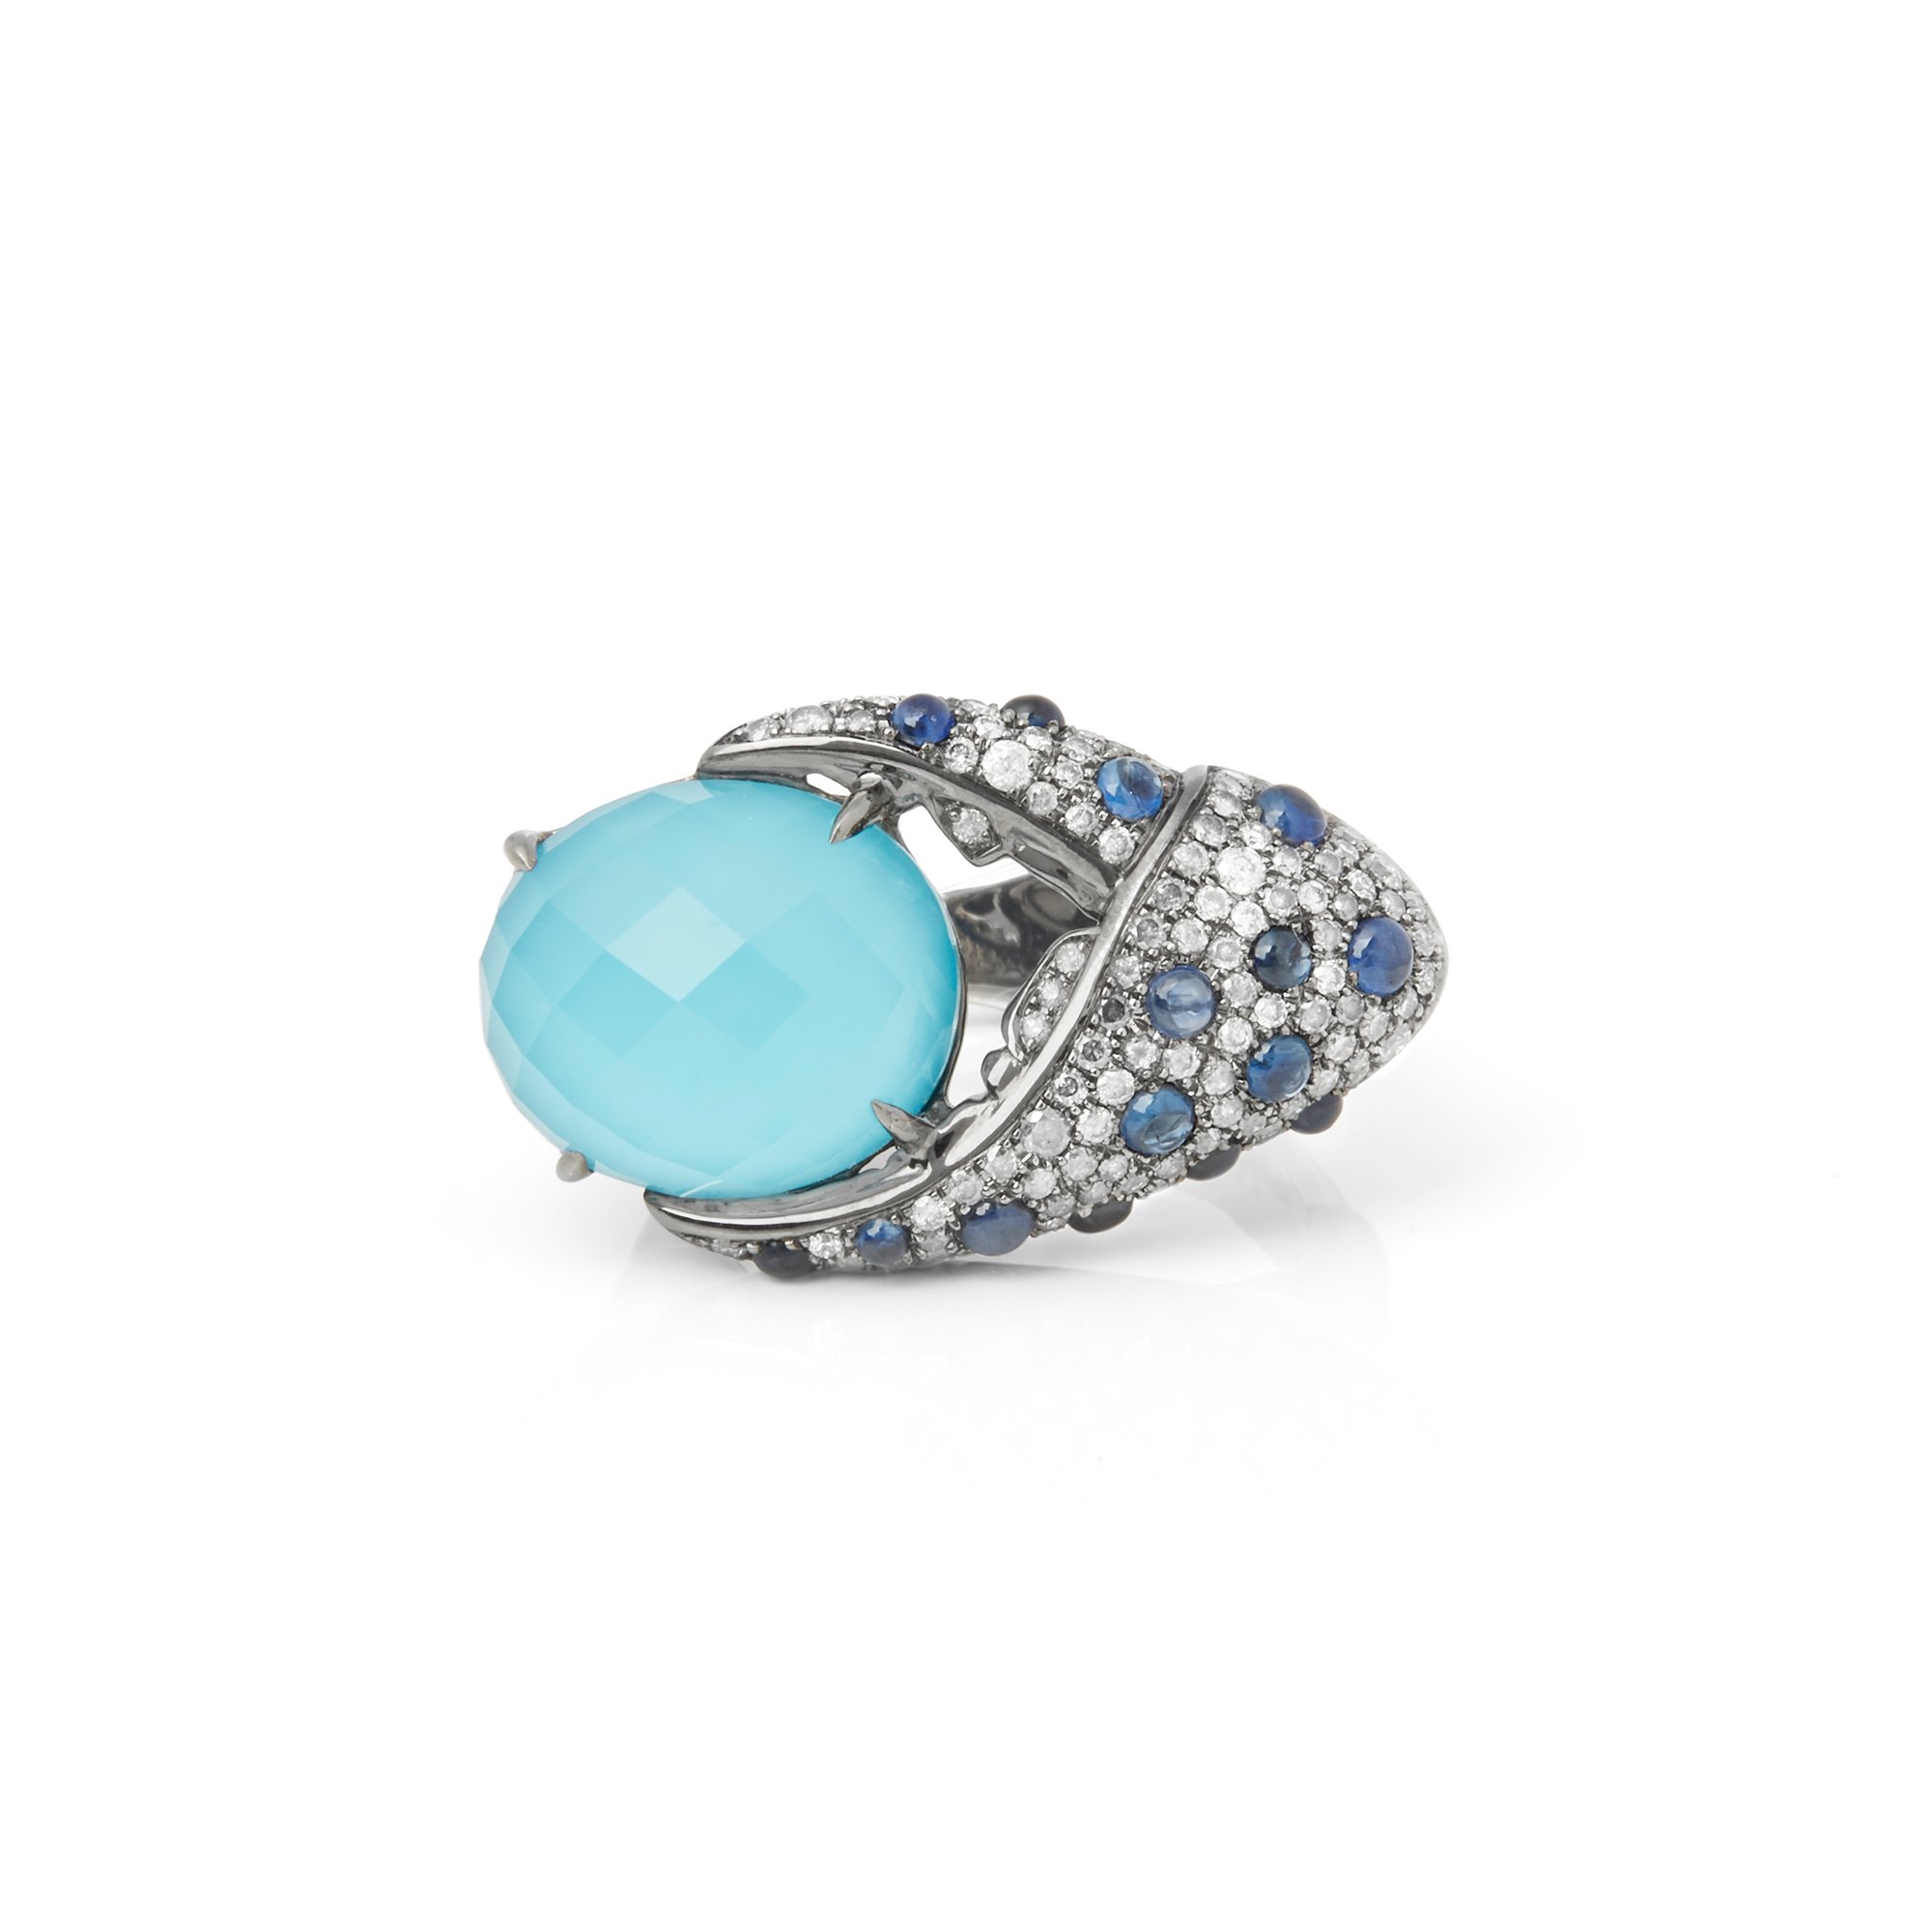 Stephen Webster 18ct White Gold Jewels Verne Turquoise and Blue Sapphire Ring